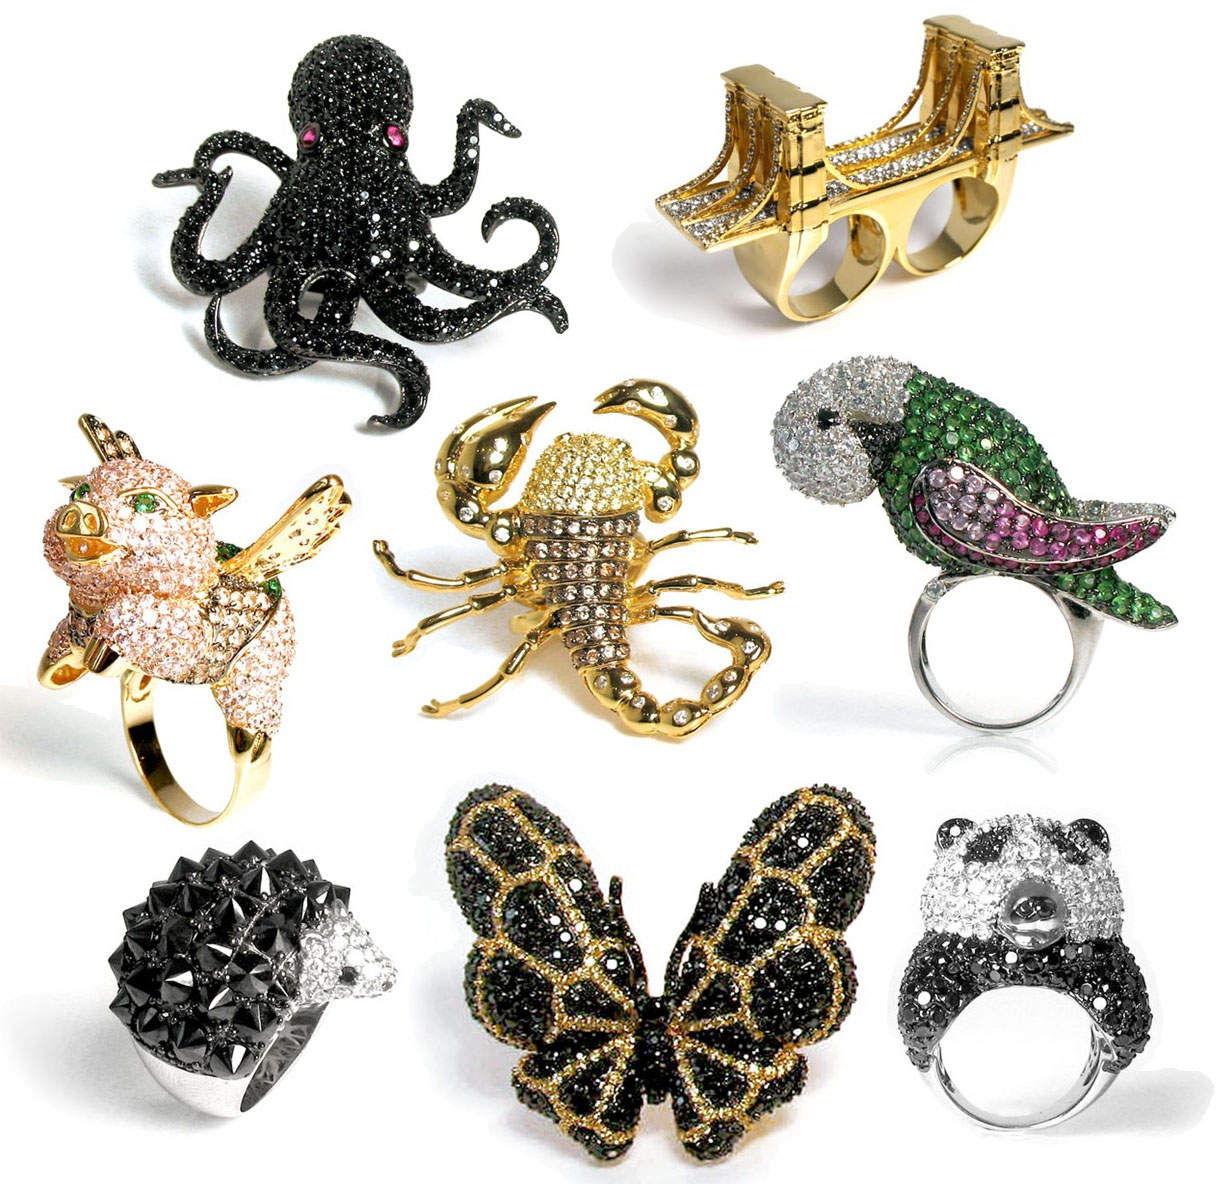 Pendants  Charms on Noir Is Known For Their Fantastically Fun And Whimsical Jewelry